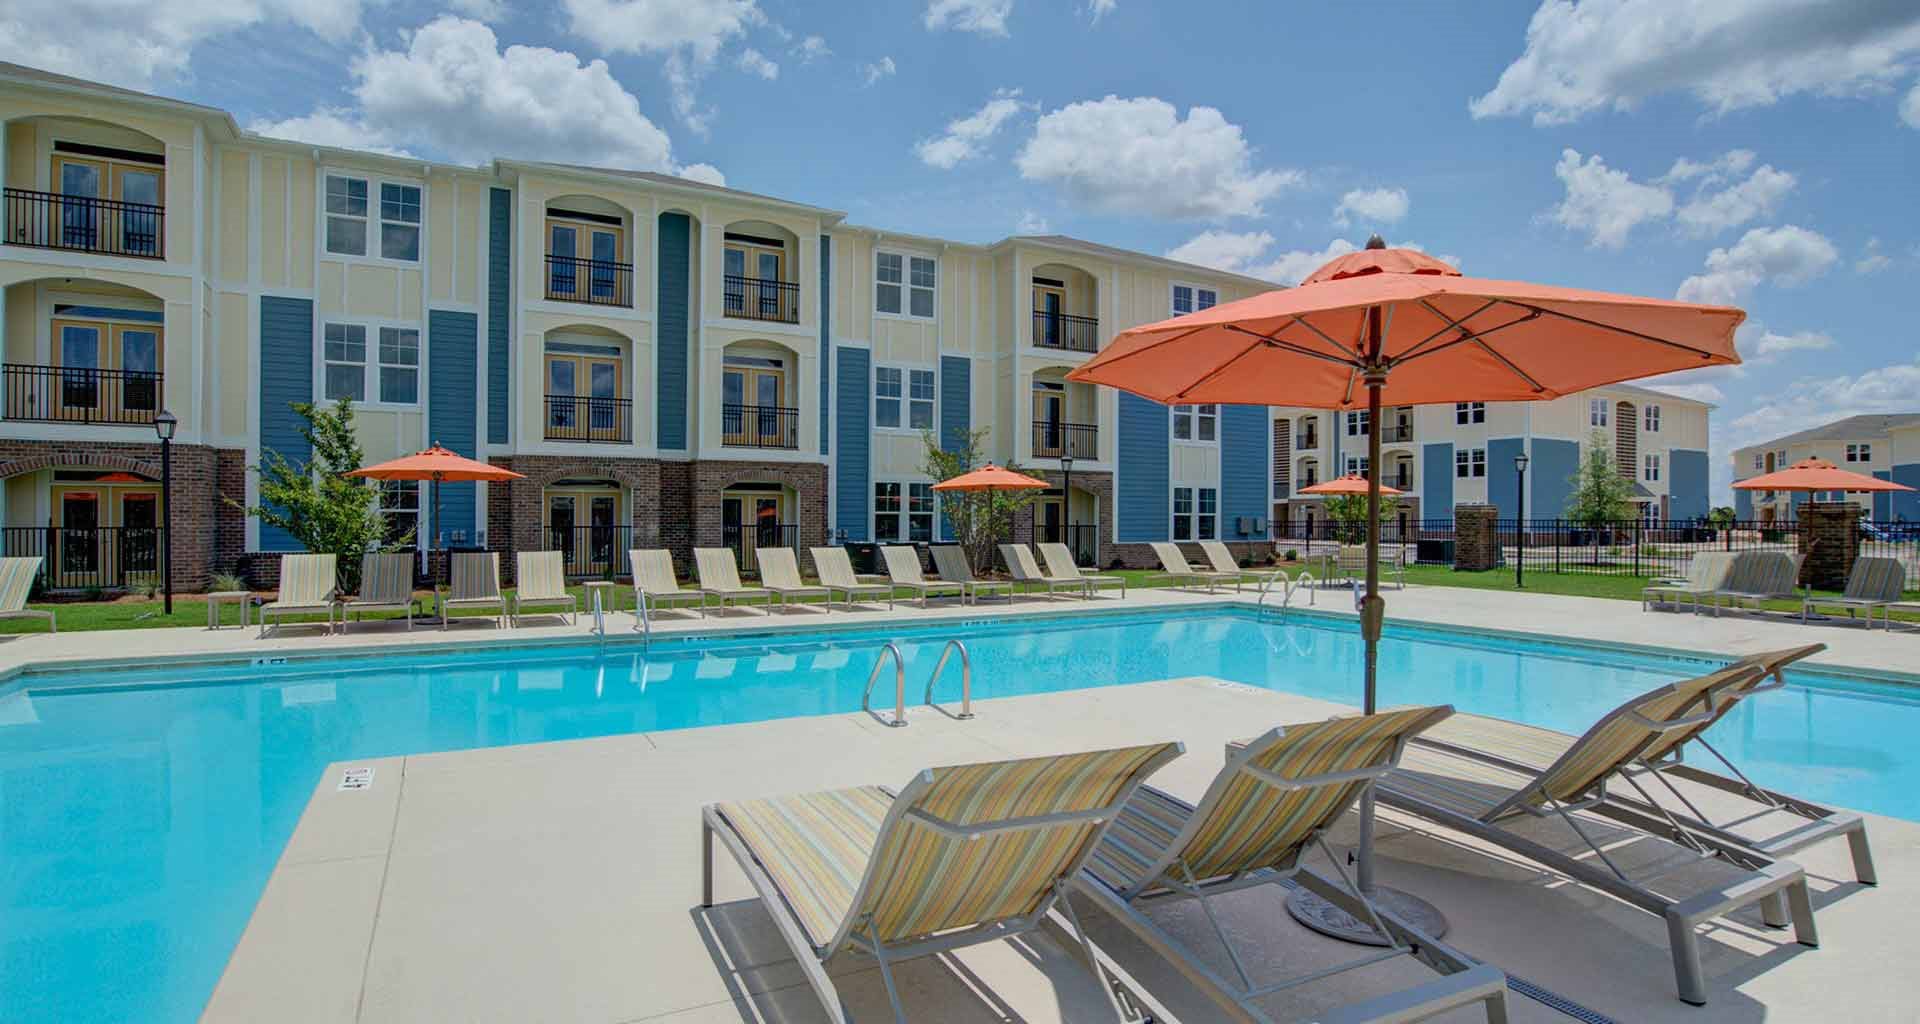 Pool Side Relaxing Area at Beckstone Apartments, Summerville, 29486